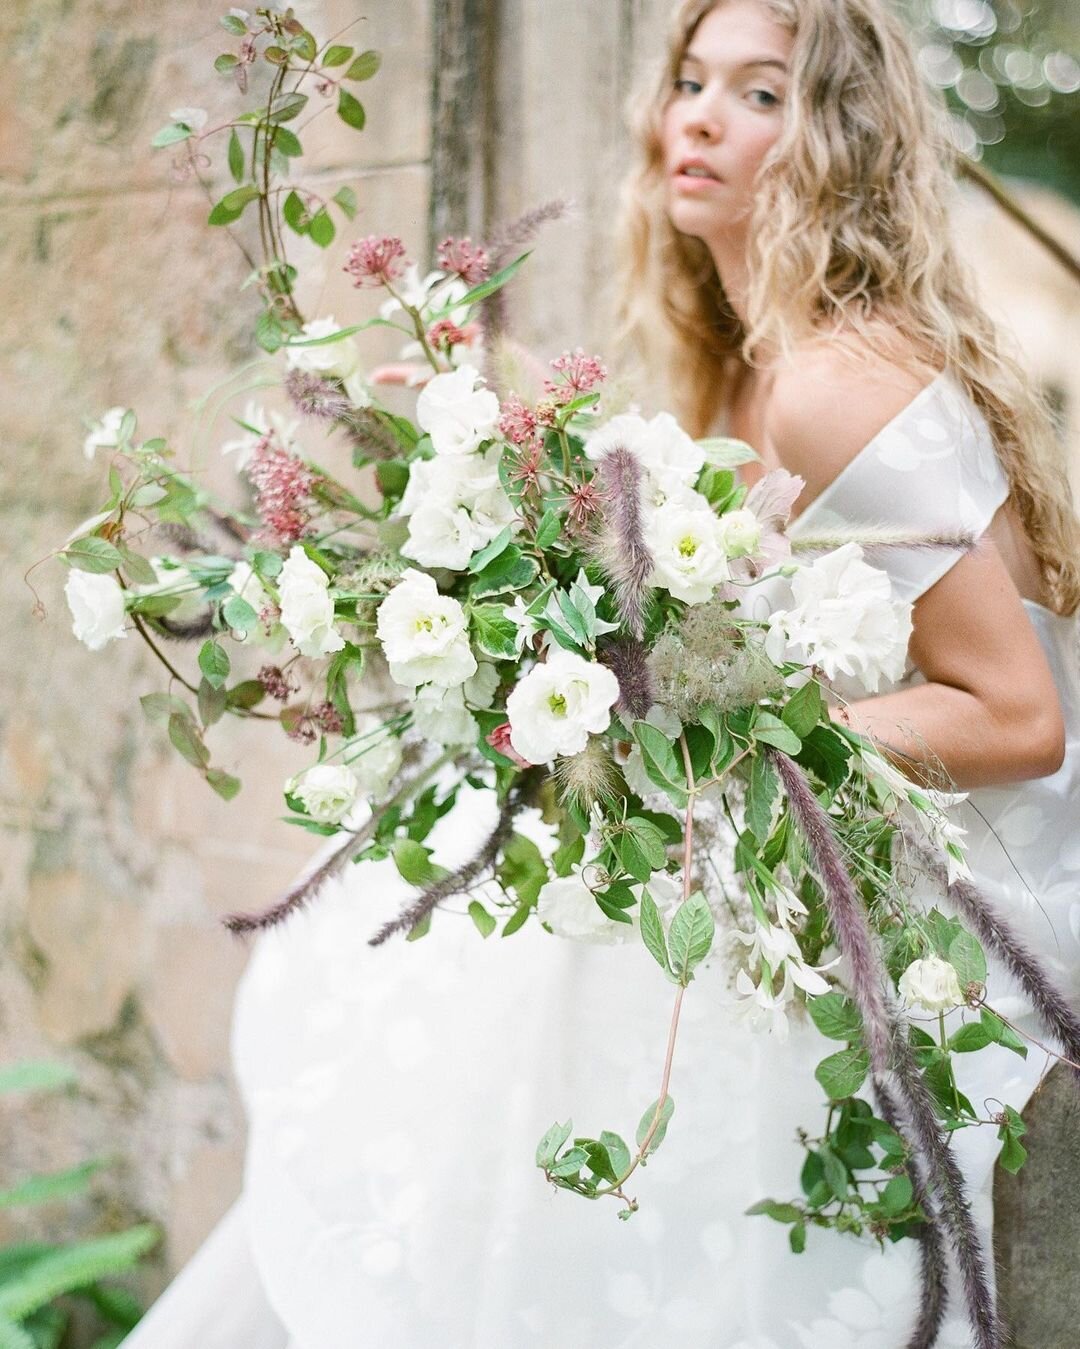 Flowers by On A Limb Florals, Photo by @bonphotage